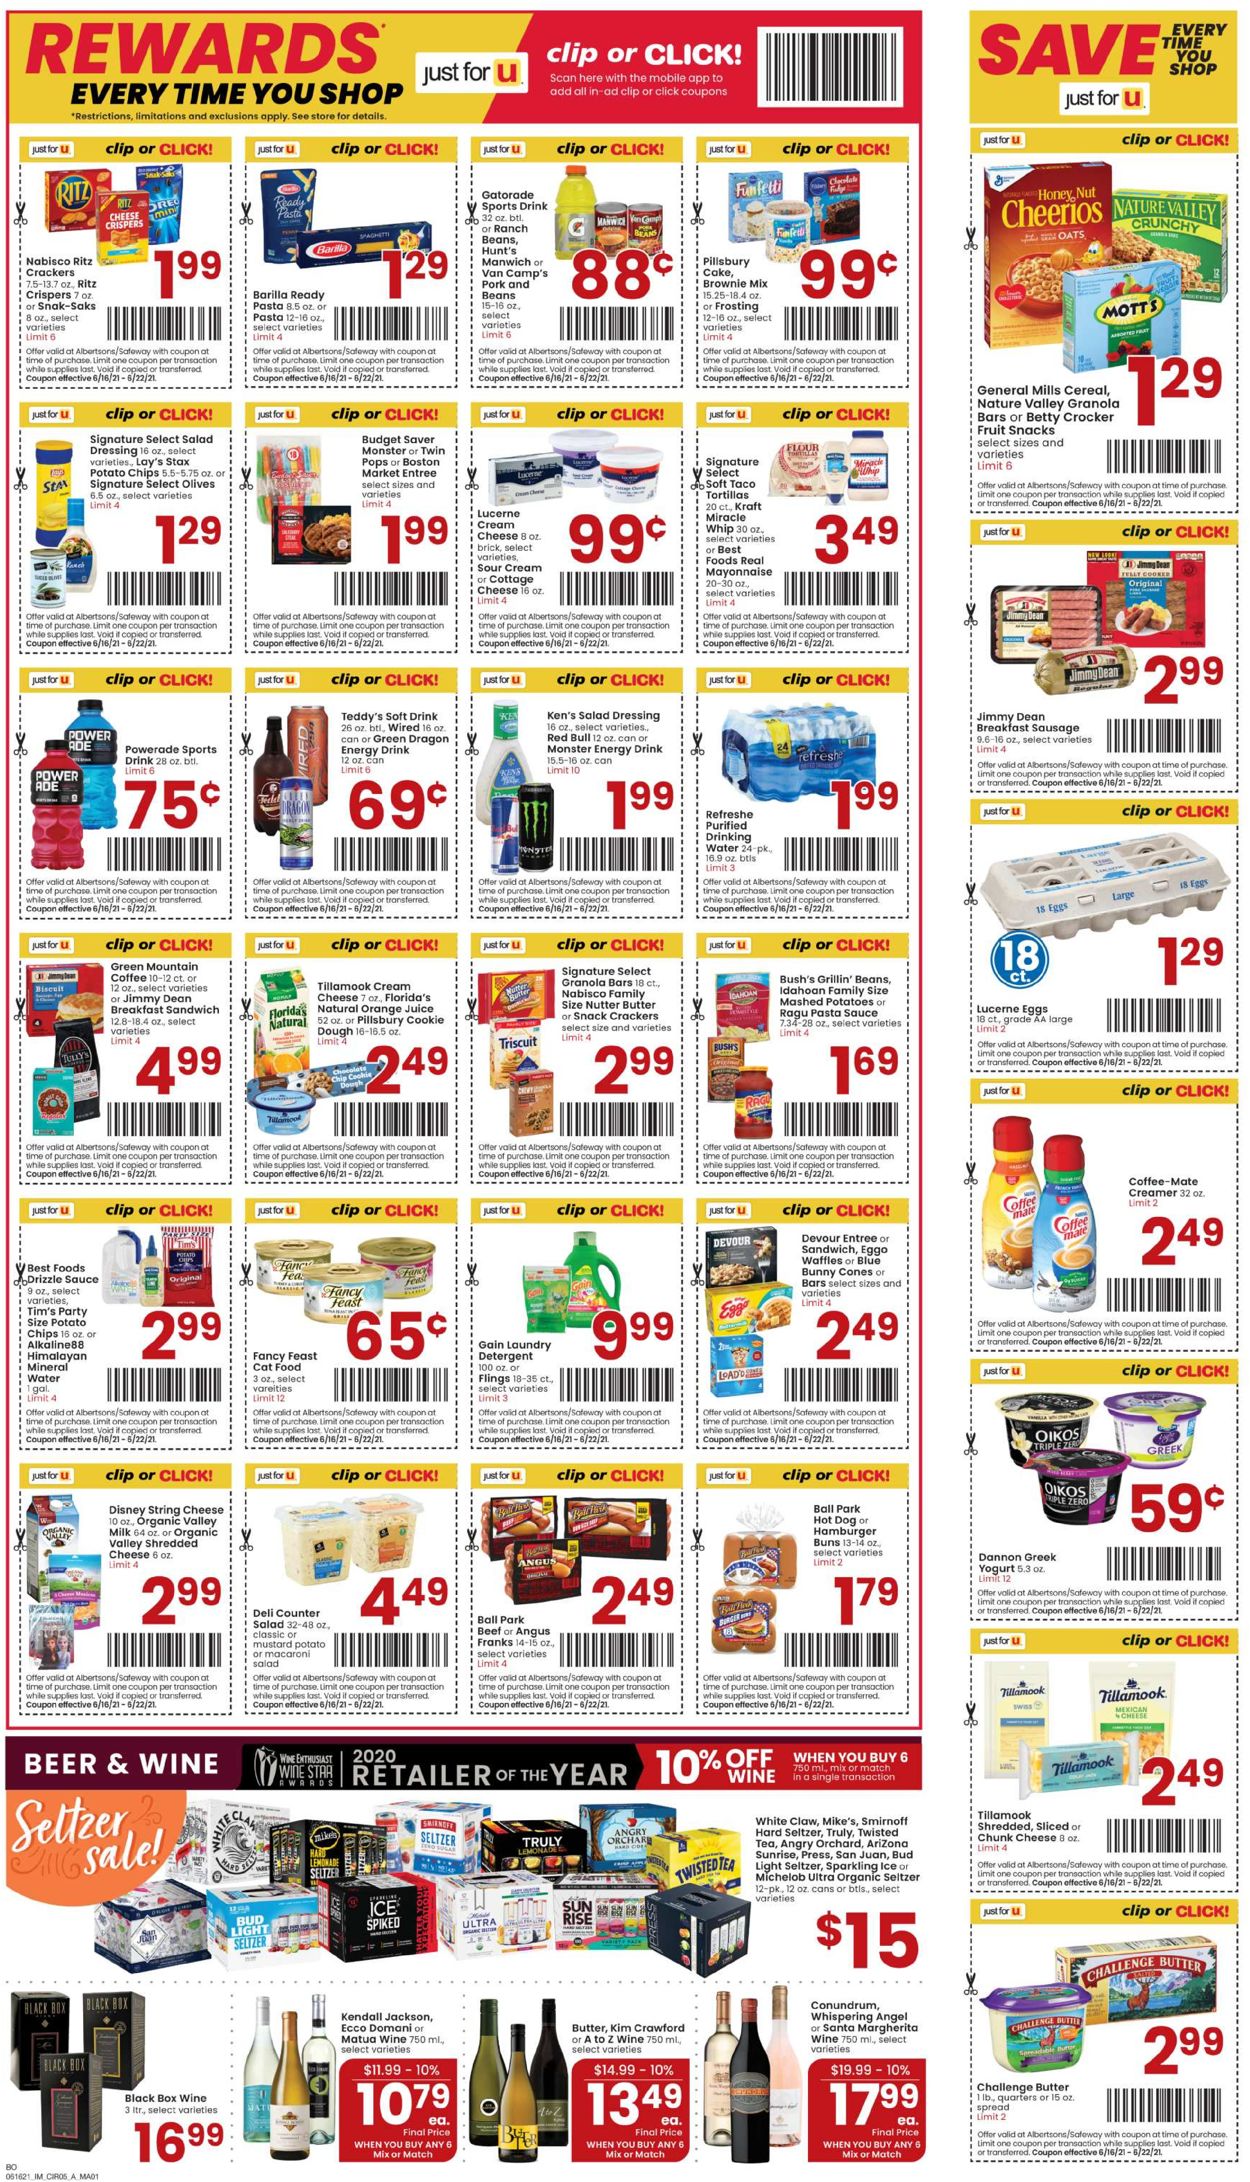 Albertsons Current weekly ad 06/16 - 06/22/2021 [5] - frequent-ads.com